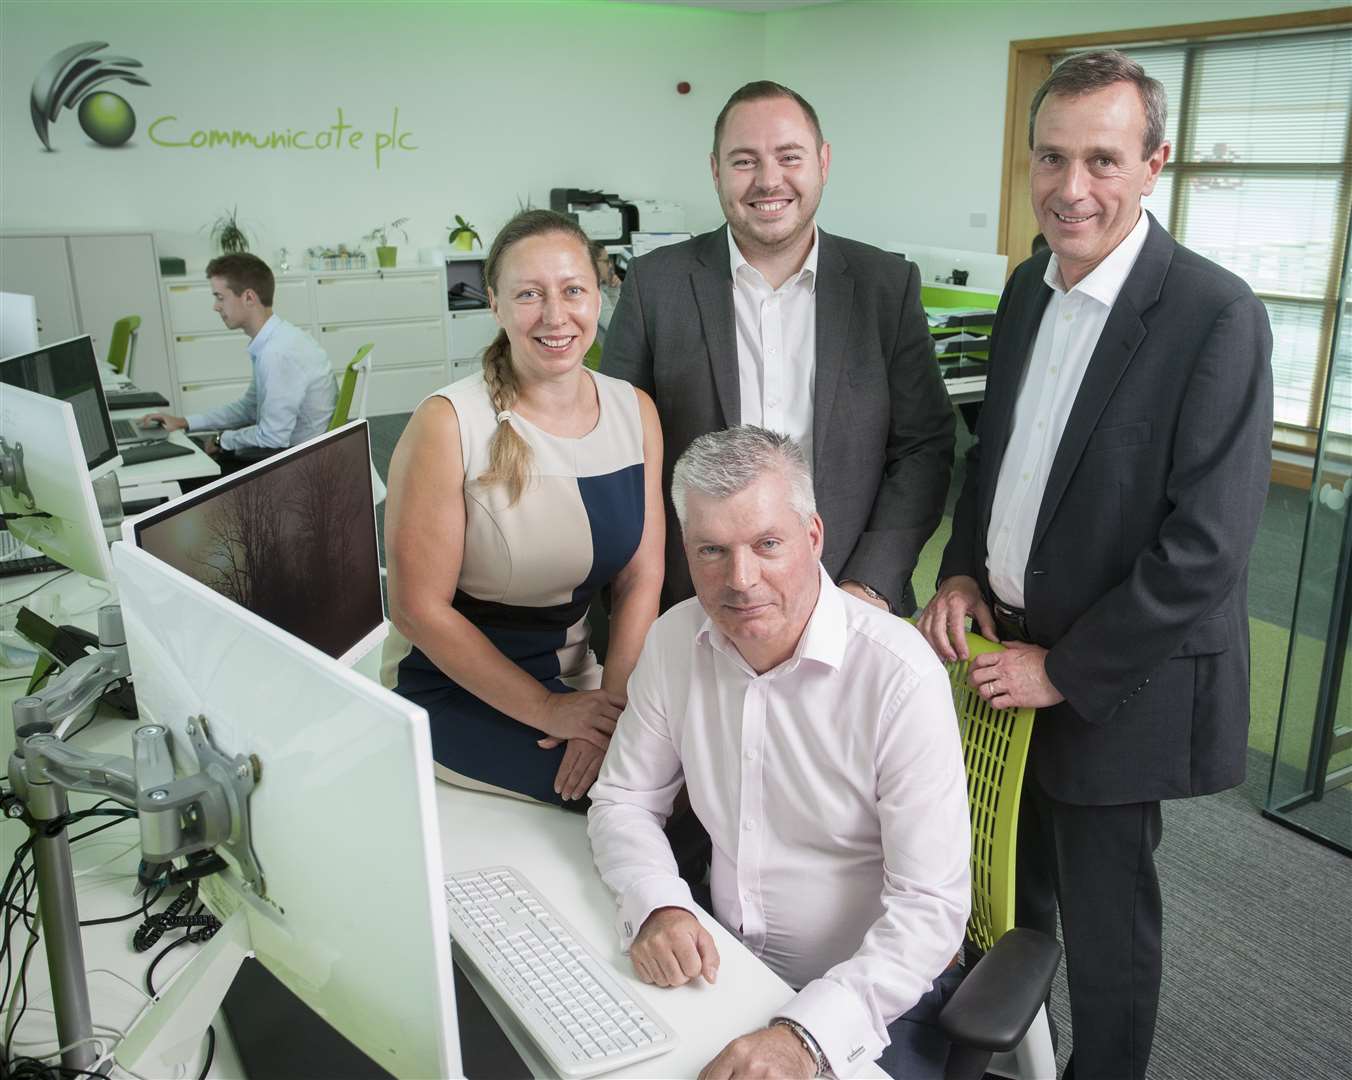 From left, Emily Bentley, Oliver Stell and John Toal with Communicate boss Tony Snaith, front